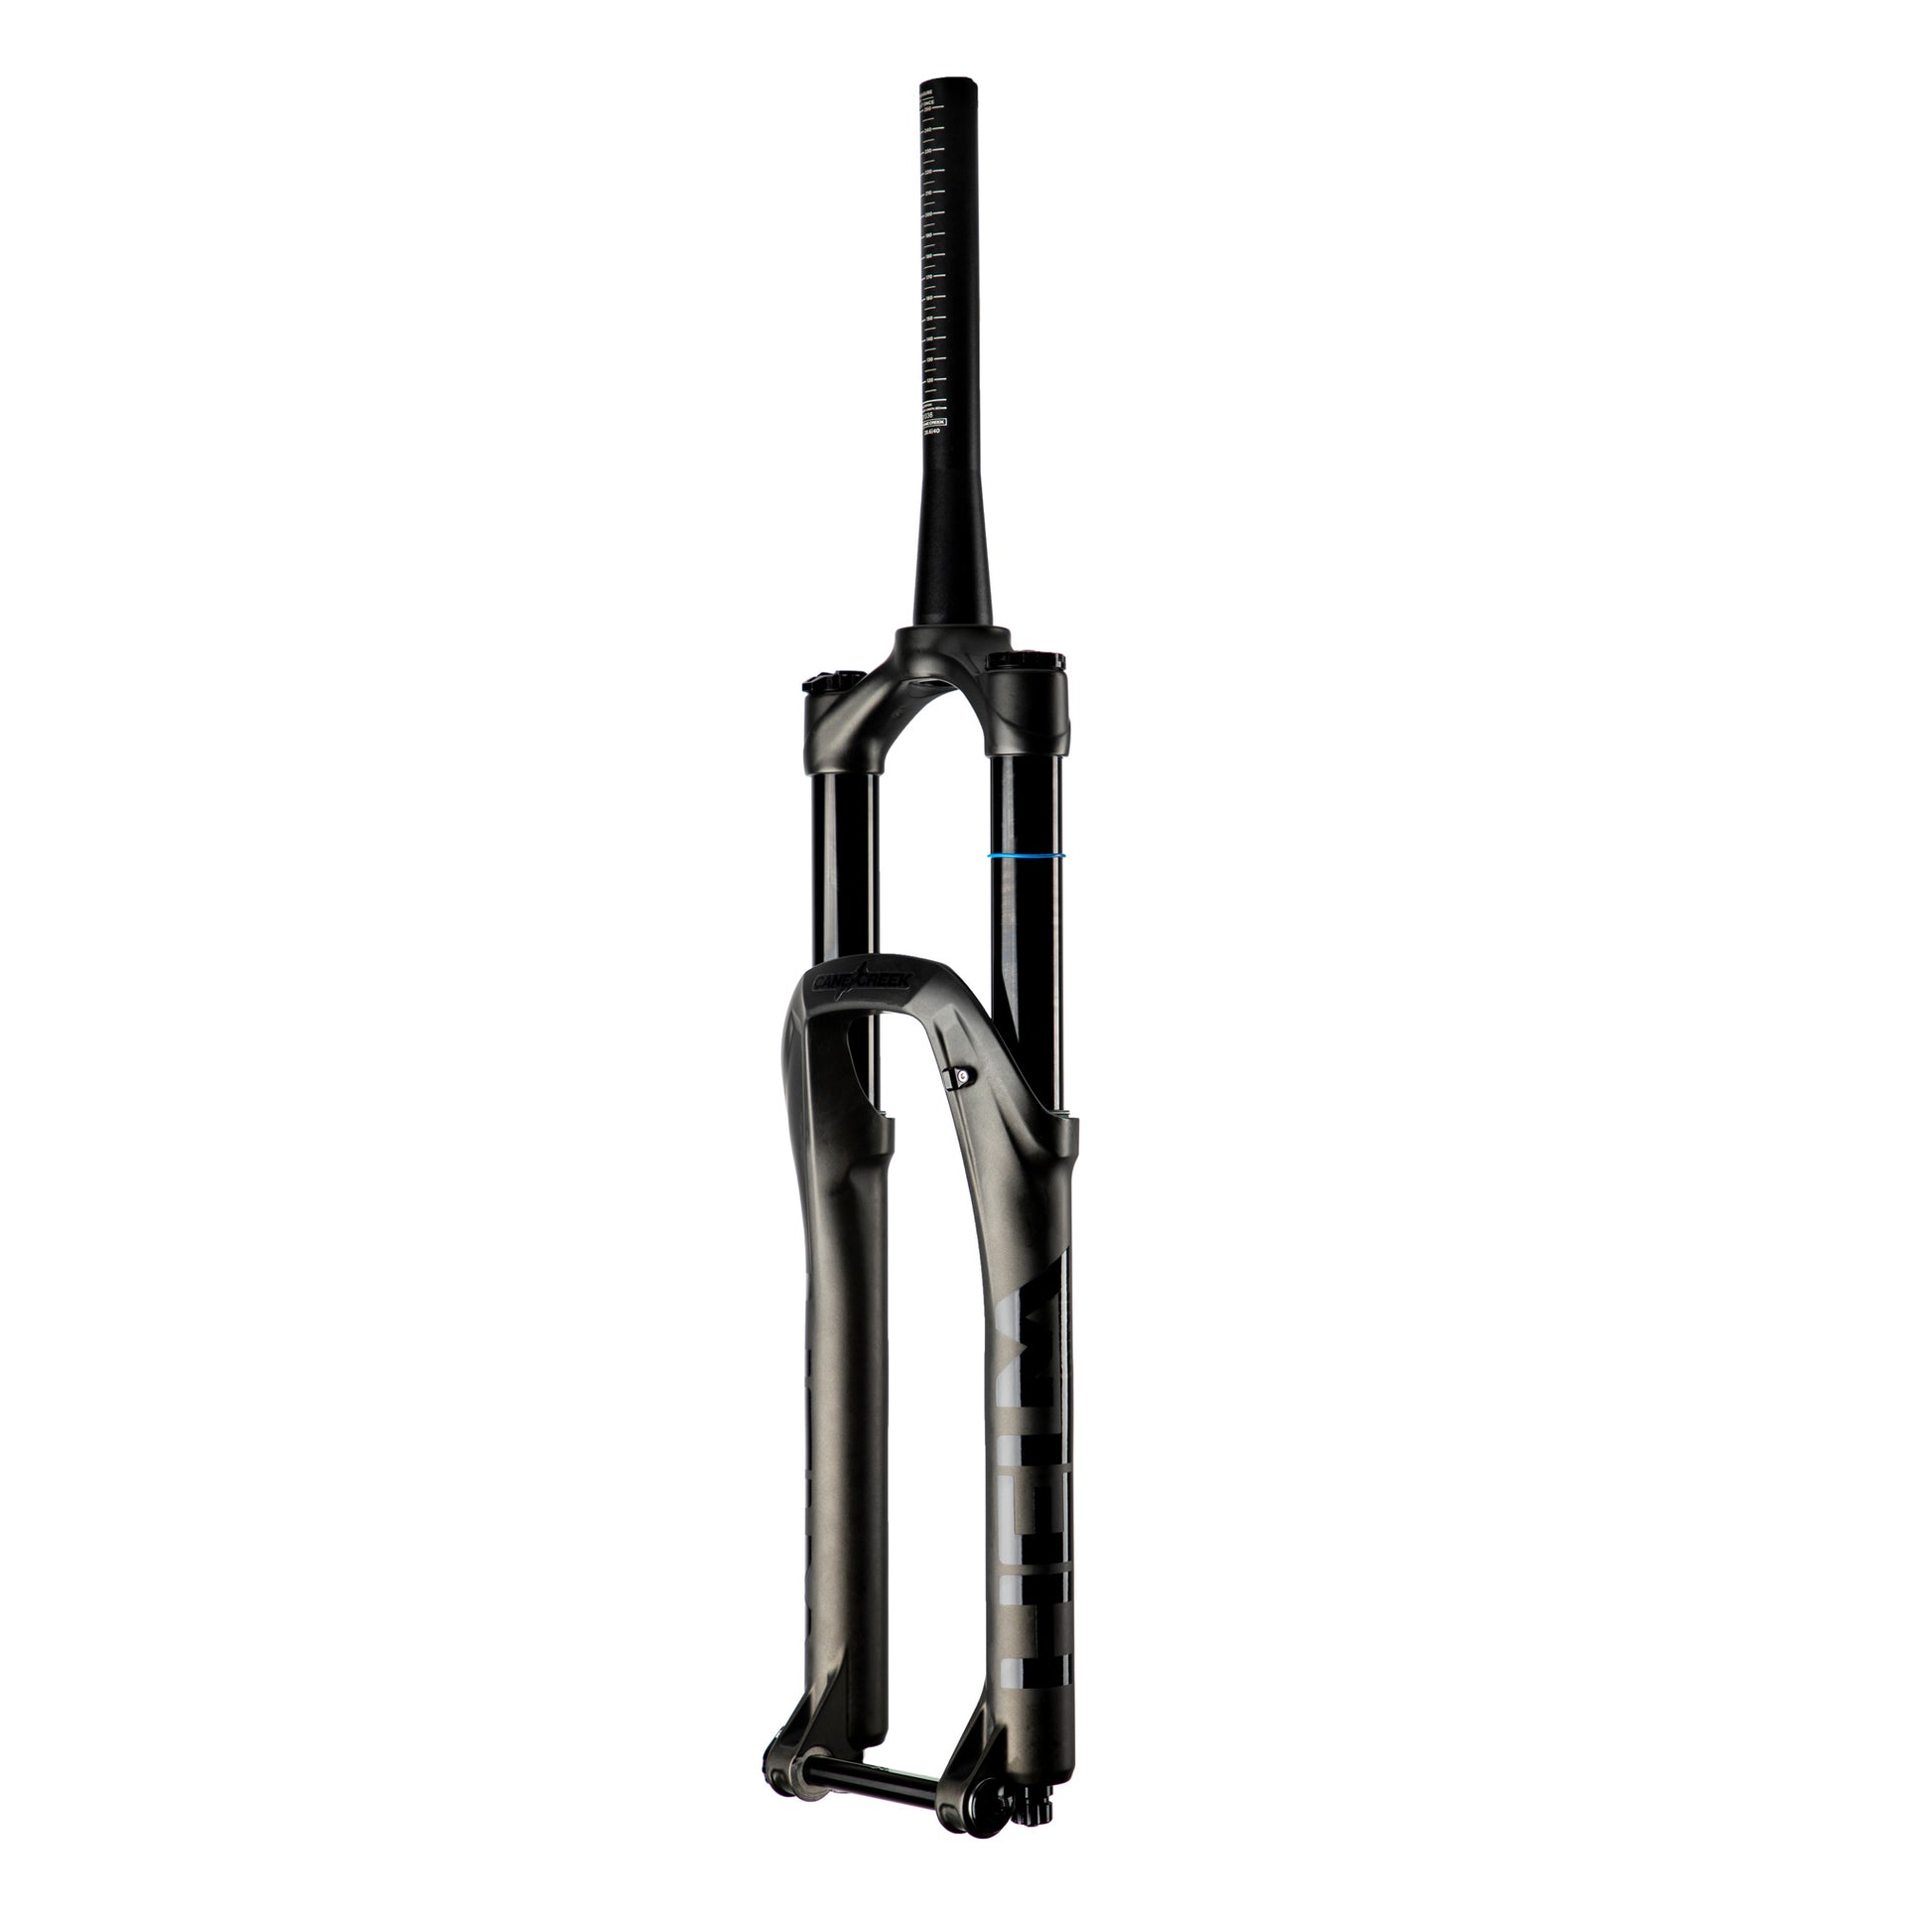 Cane Creek Helm MKII Coil 27.5 Suspension Fork - 27.5" 160 mm 15 x 110 mm 44 mm Offset Gloss BLK Suspension Fork Cane Creek   